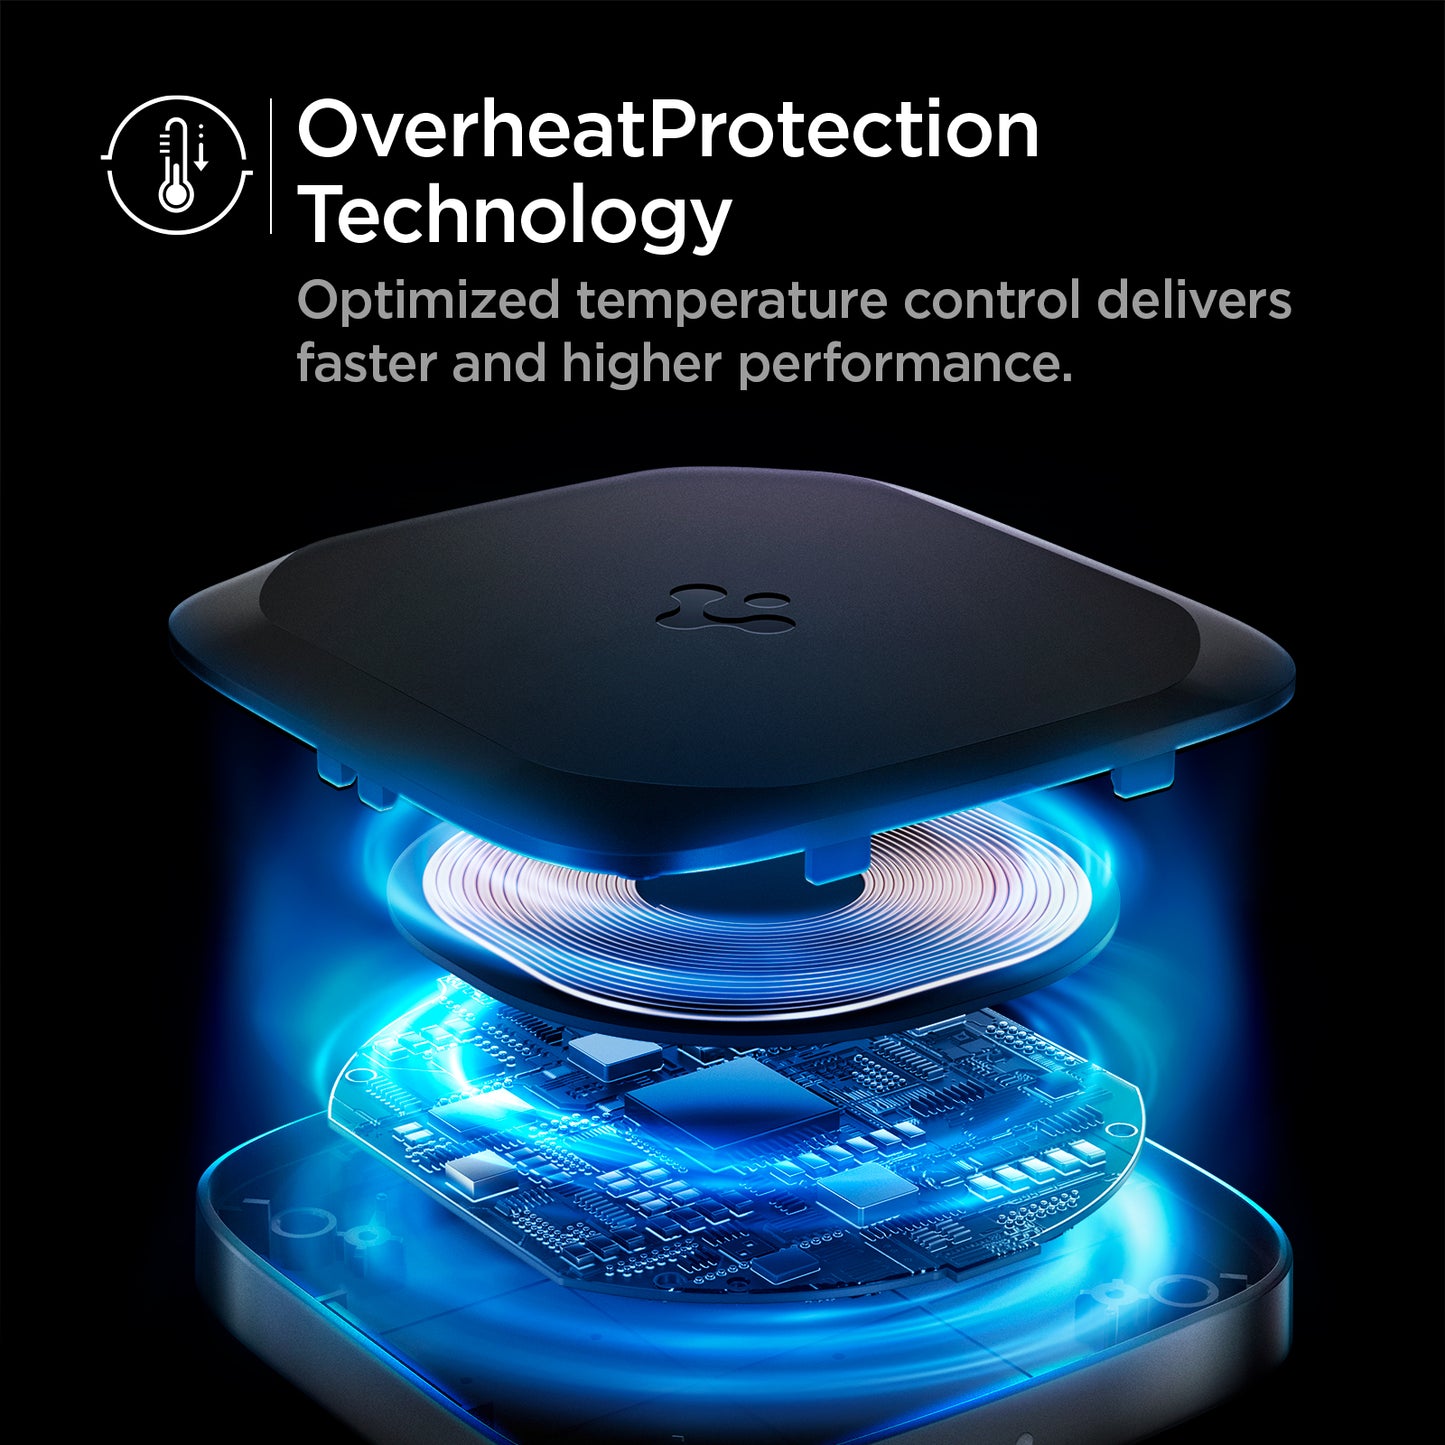 ACH02578 - ArcField™ 15W Wireless Charger PF2004 in Black showing the OverheatProtection Technology. Optimized temperature control delivers faster and higher performance. Inside technology of a wireless charger